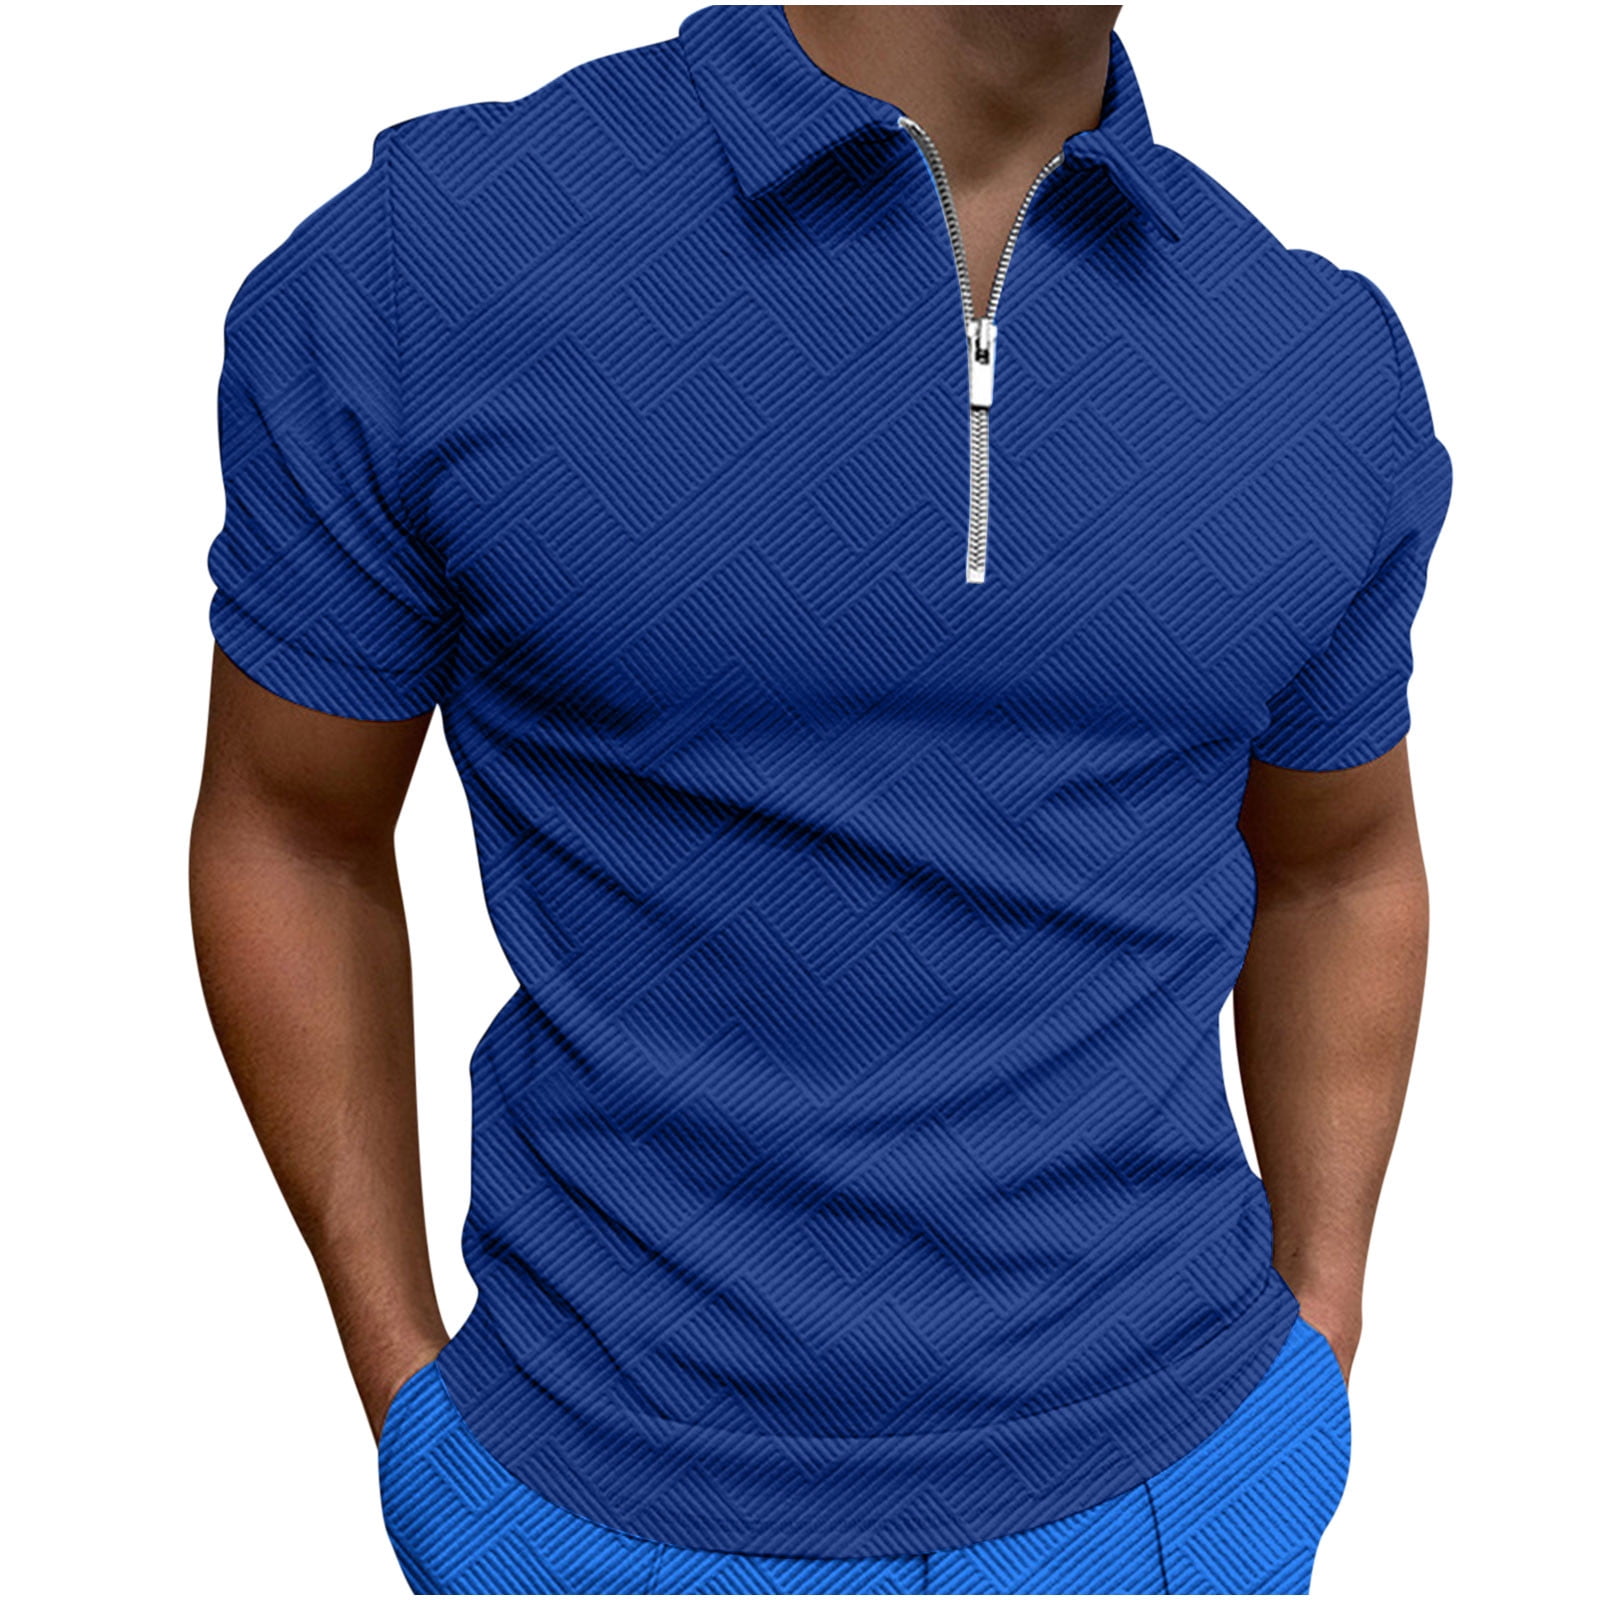 Ribbed Polo Shirts for Men Fashion 1/4 Zip Up Casual Lapel Collared Tops  Short Sleeve Slim Fit Business Work Tee (Large, Khaki) 